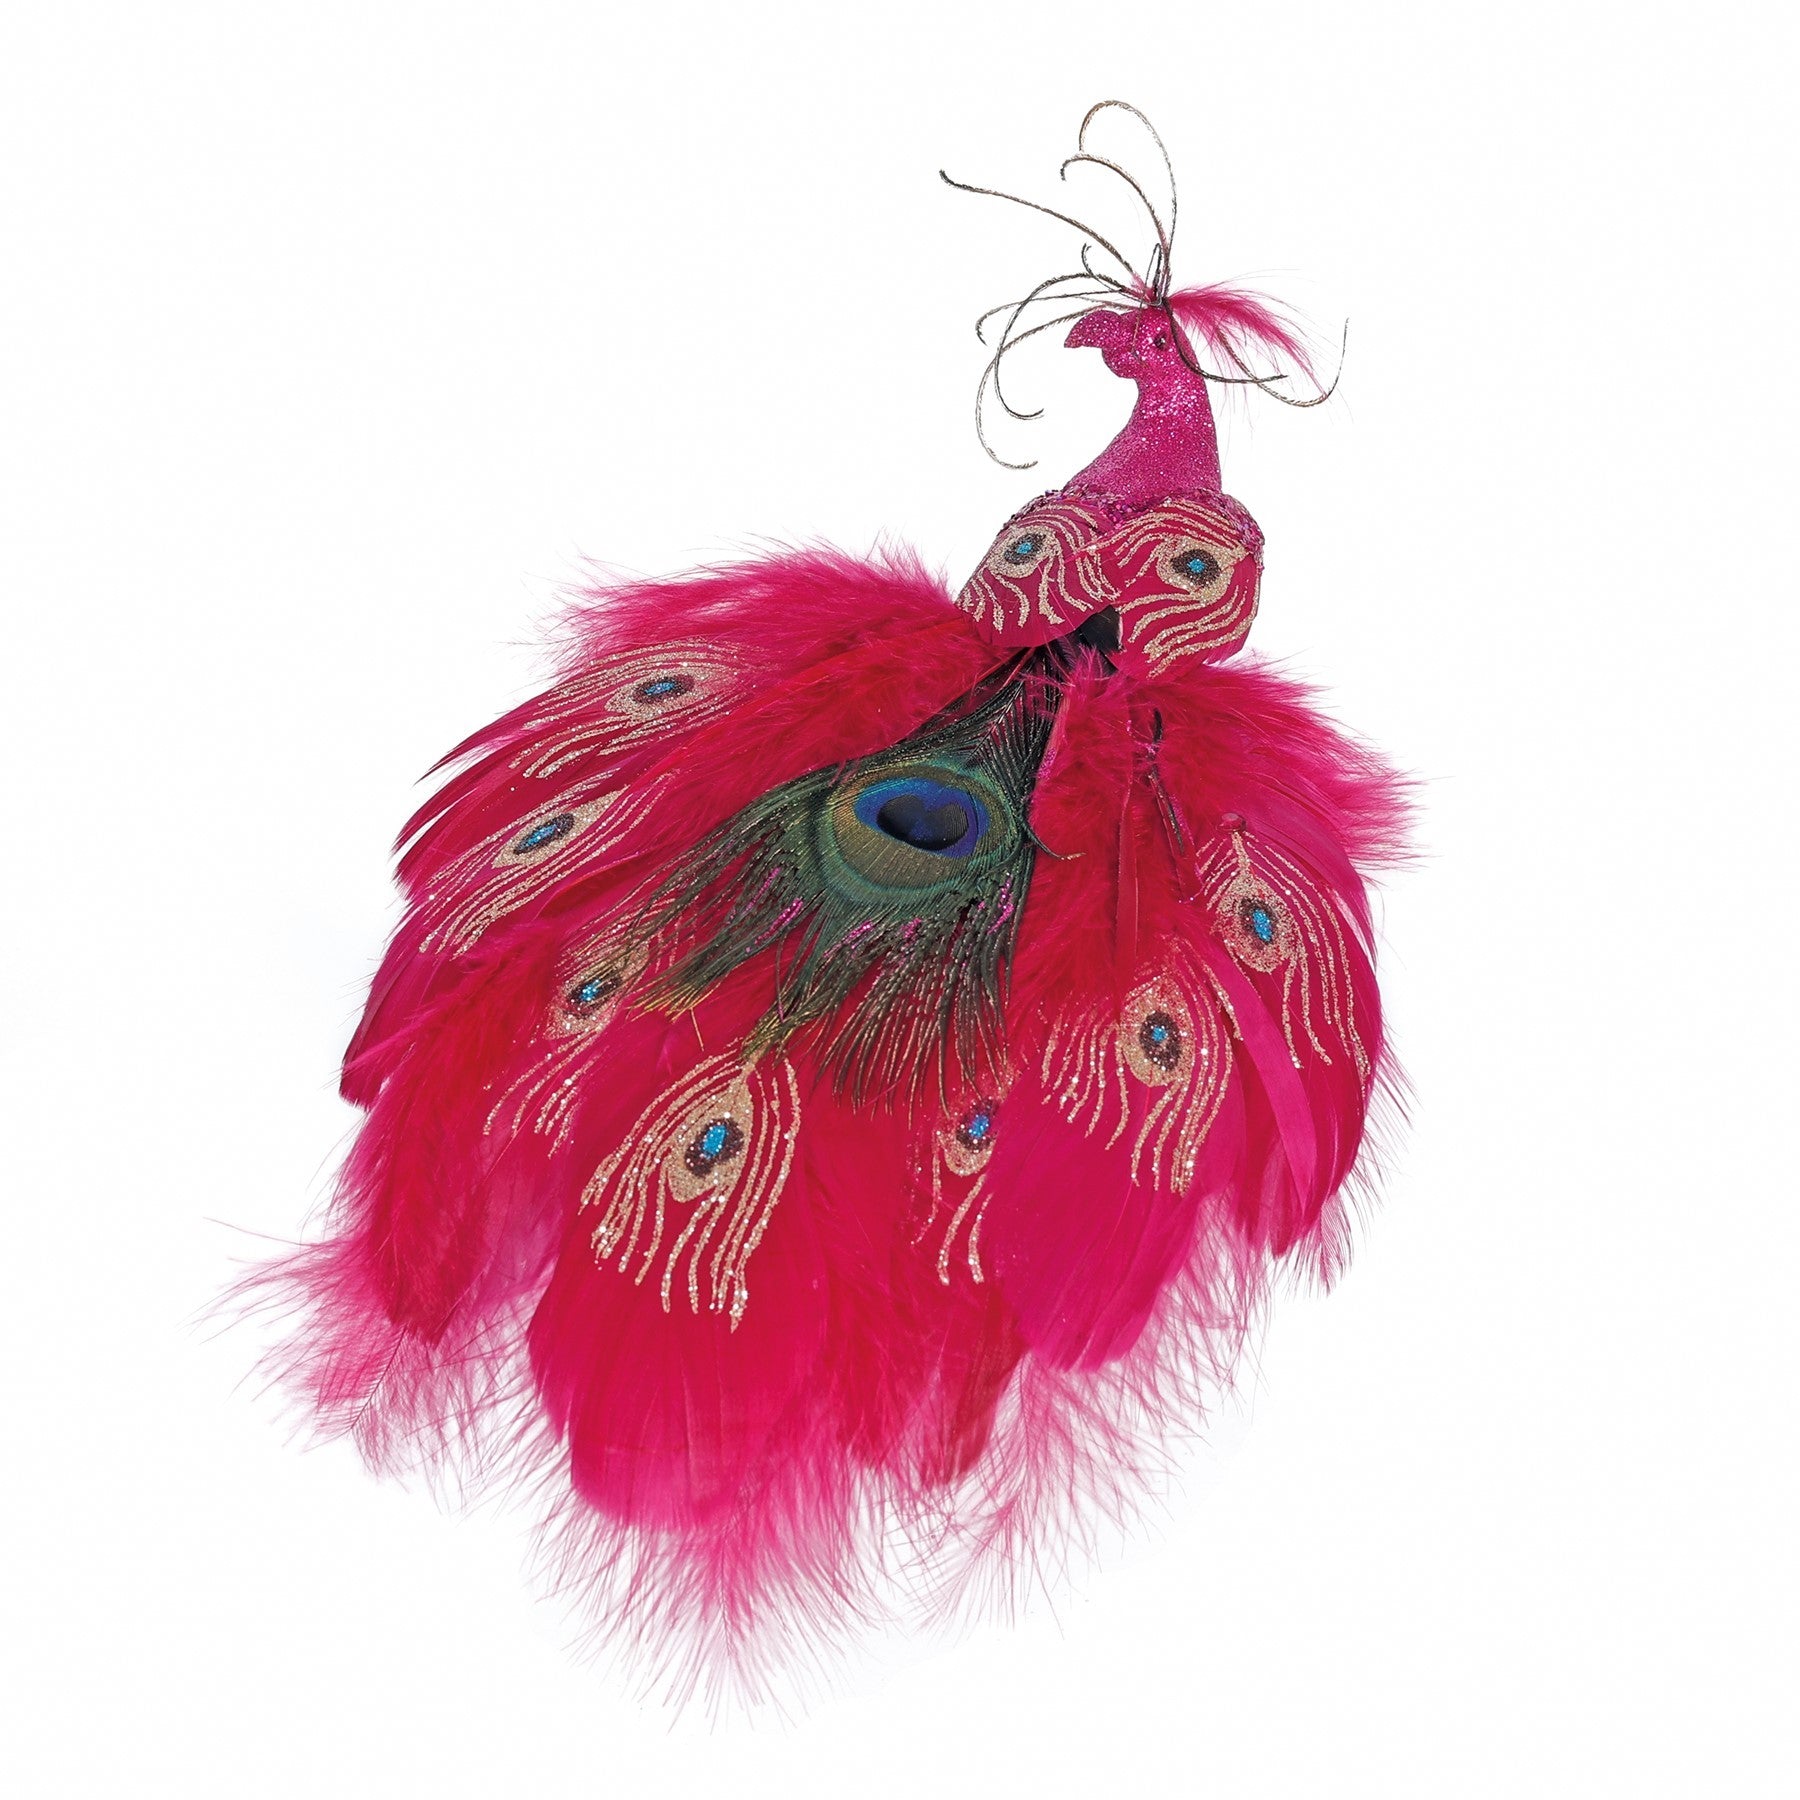 View Hot Pink Peacock 30cm information